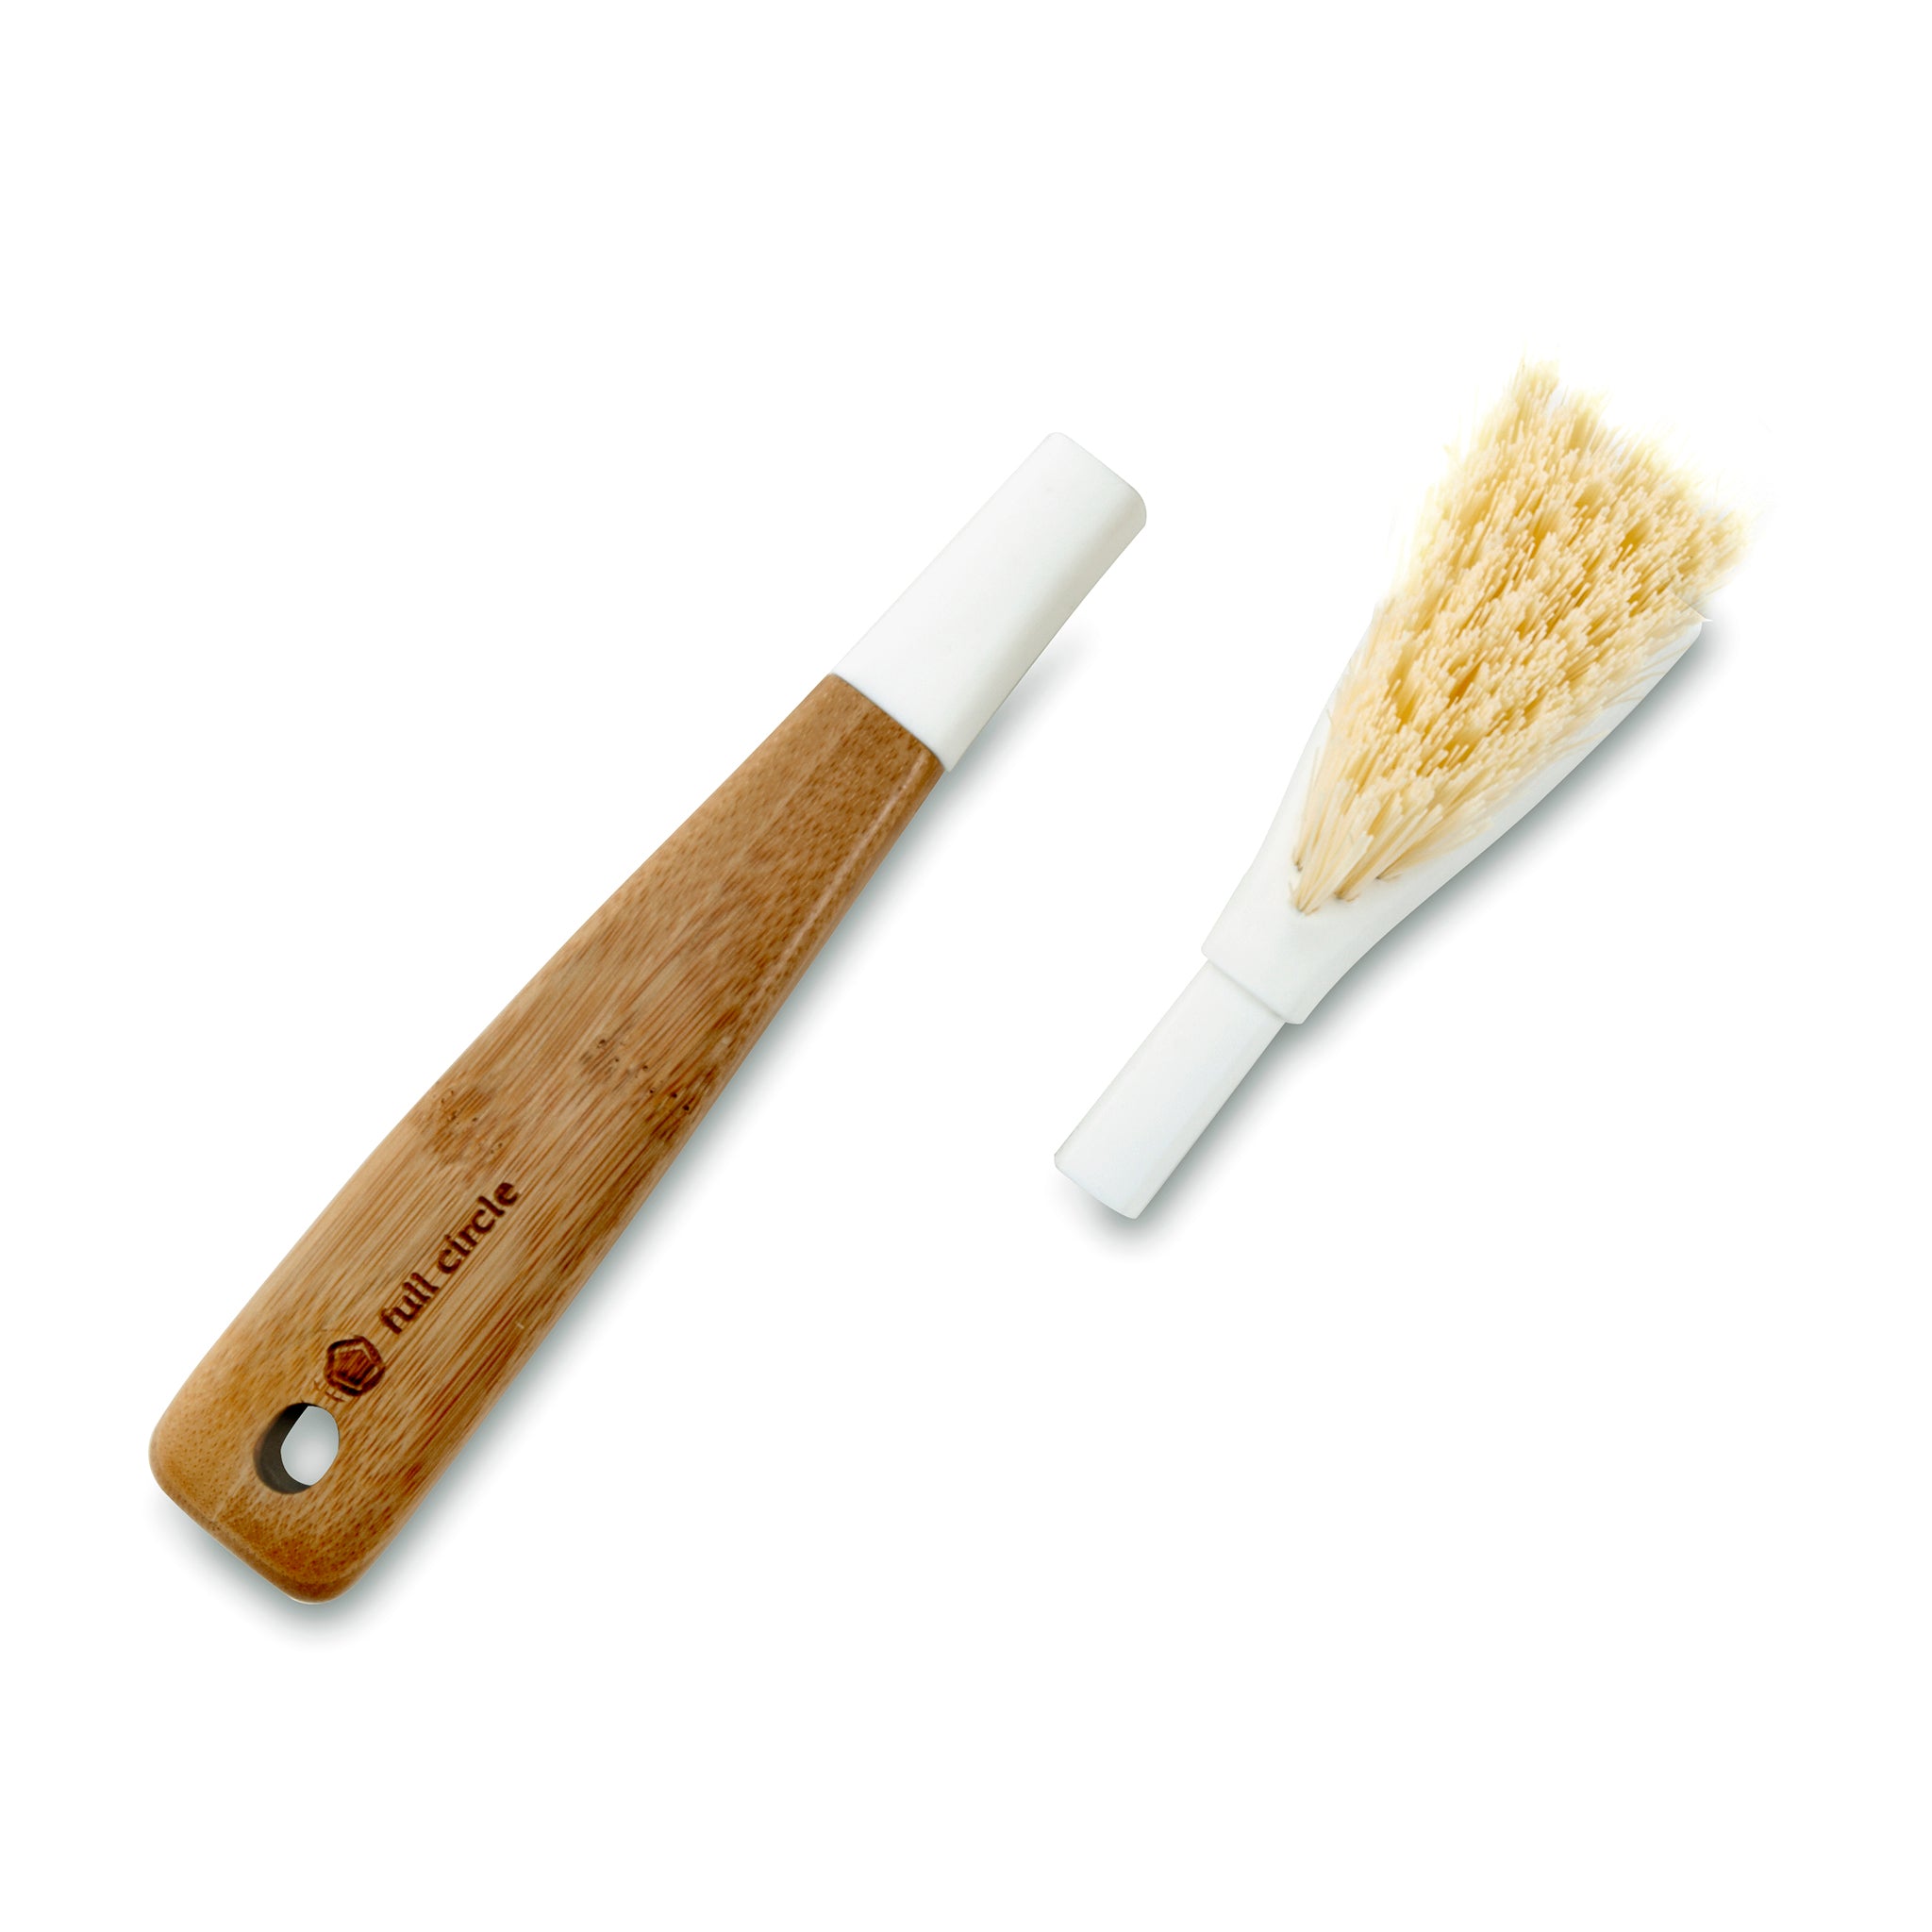 Full Circle Seriously Suds Up Soap-Dispensing Dish Cleaning Brush Set –  Full Circle Home